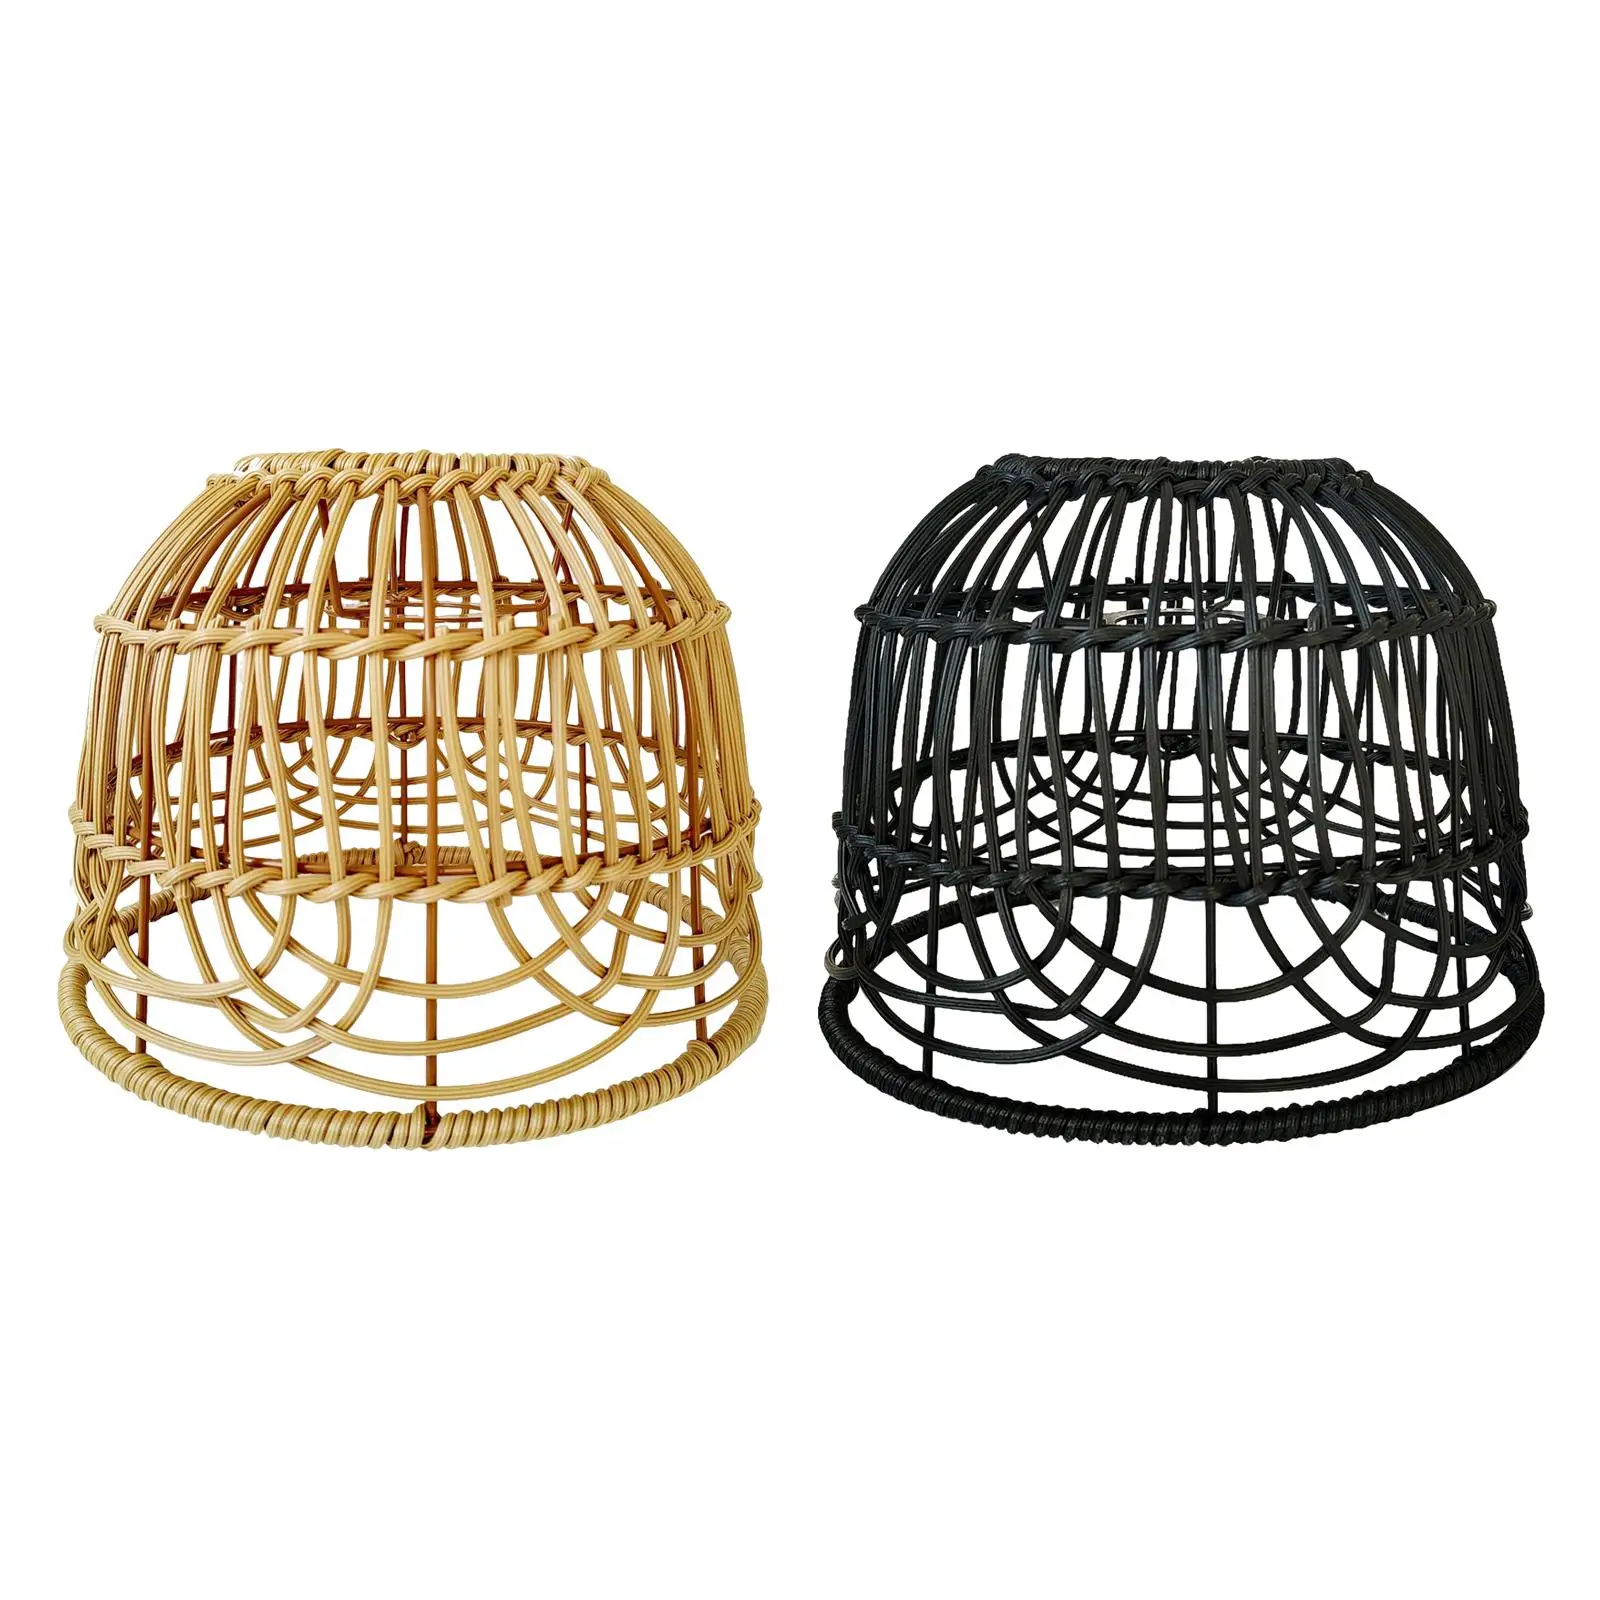 

Rattan Lampshade Accessories Hanging Hanging Lamp Lampshade Scandi Droplight Wicker Pendant Light Cover for teahouse restaurants